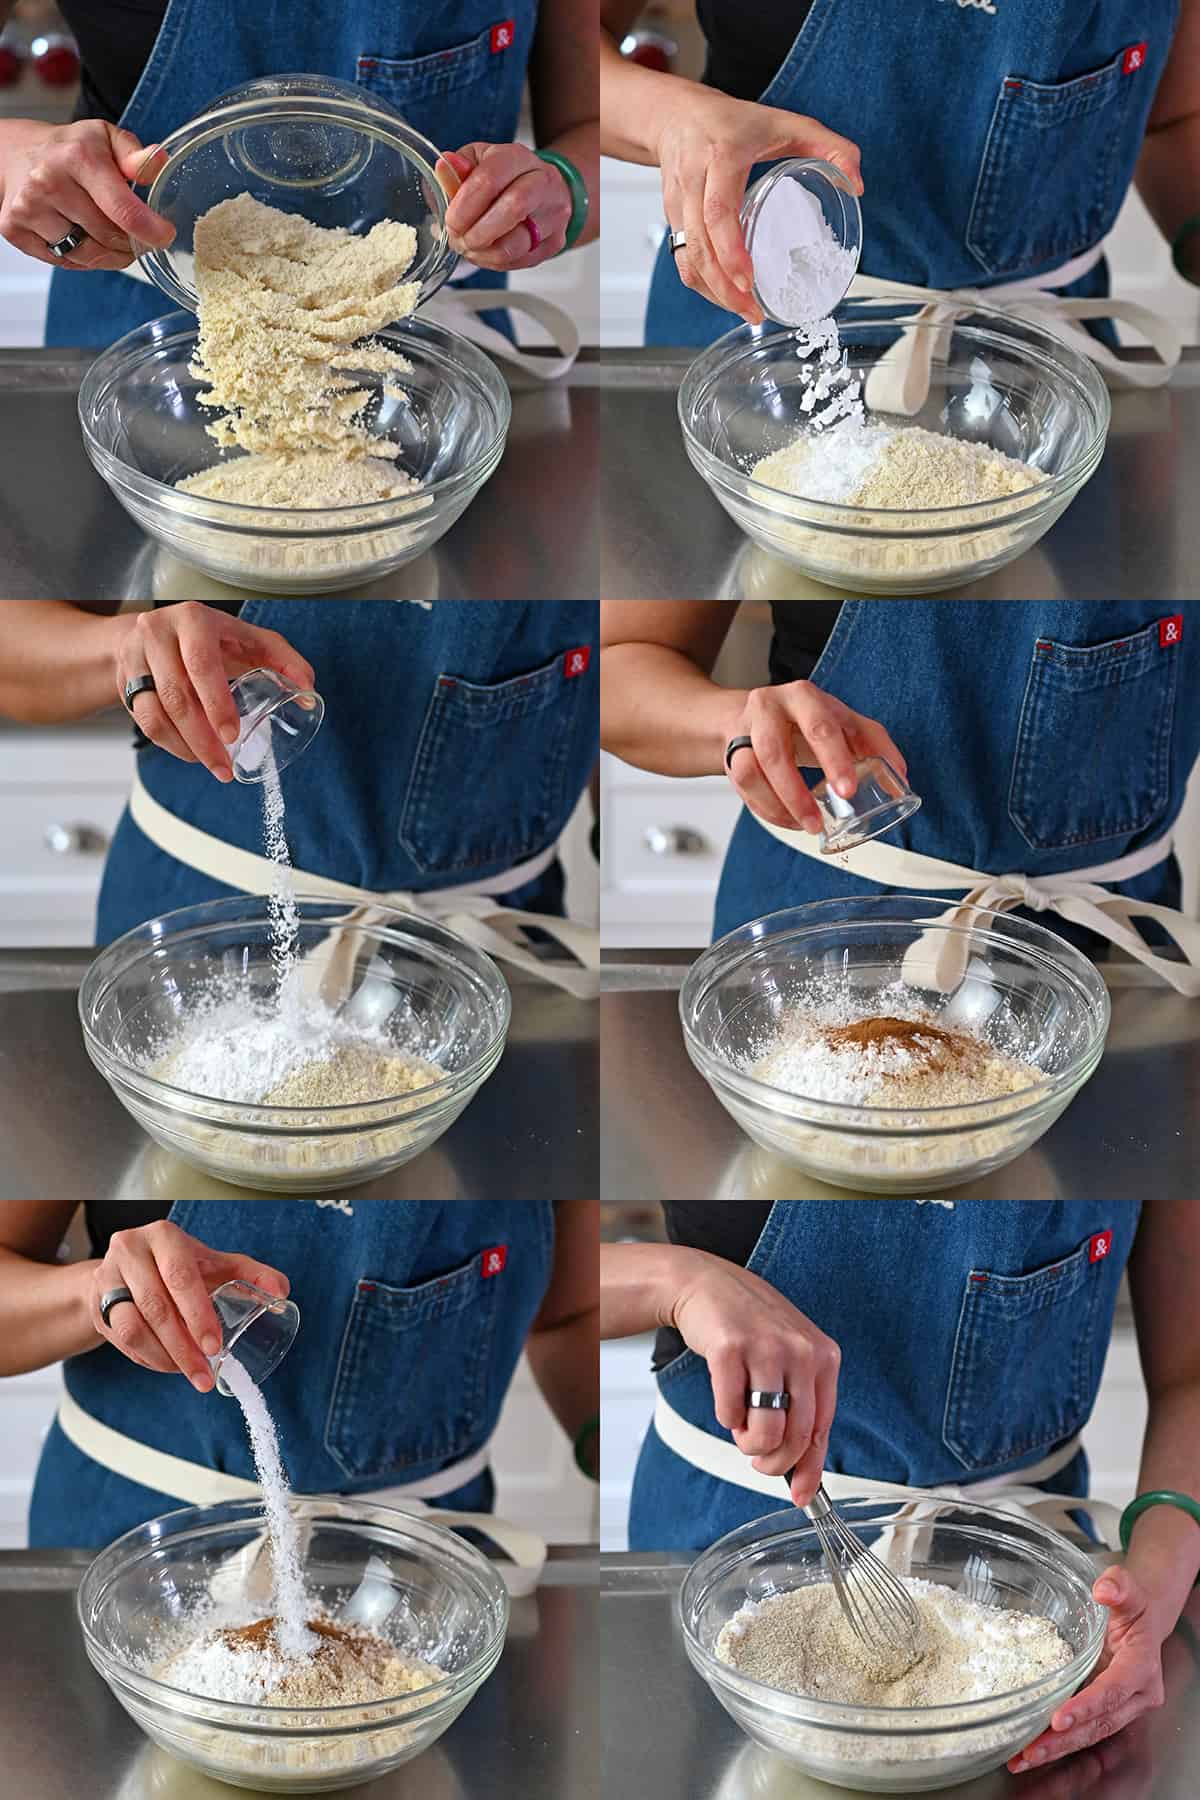 Six sequential photos showing someone combining dry ingredients to make paleo banana cookies in a glass bowl.